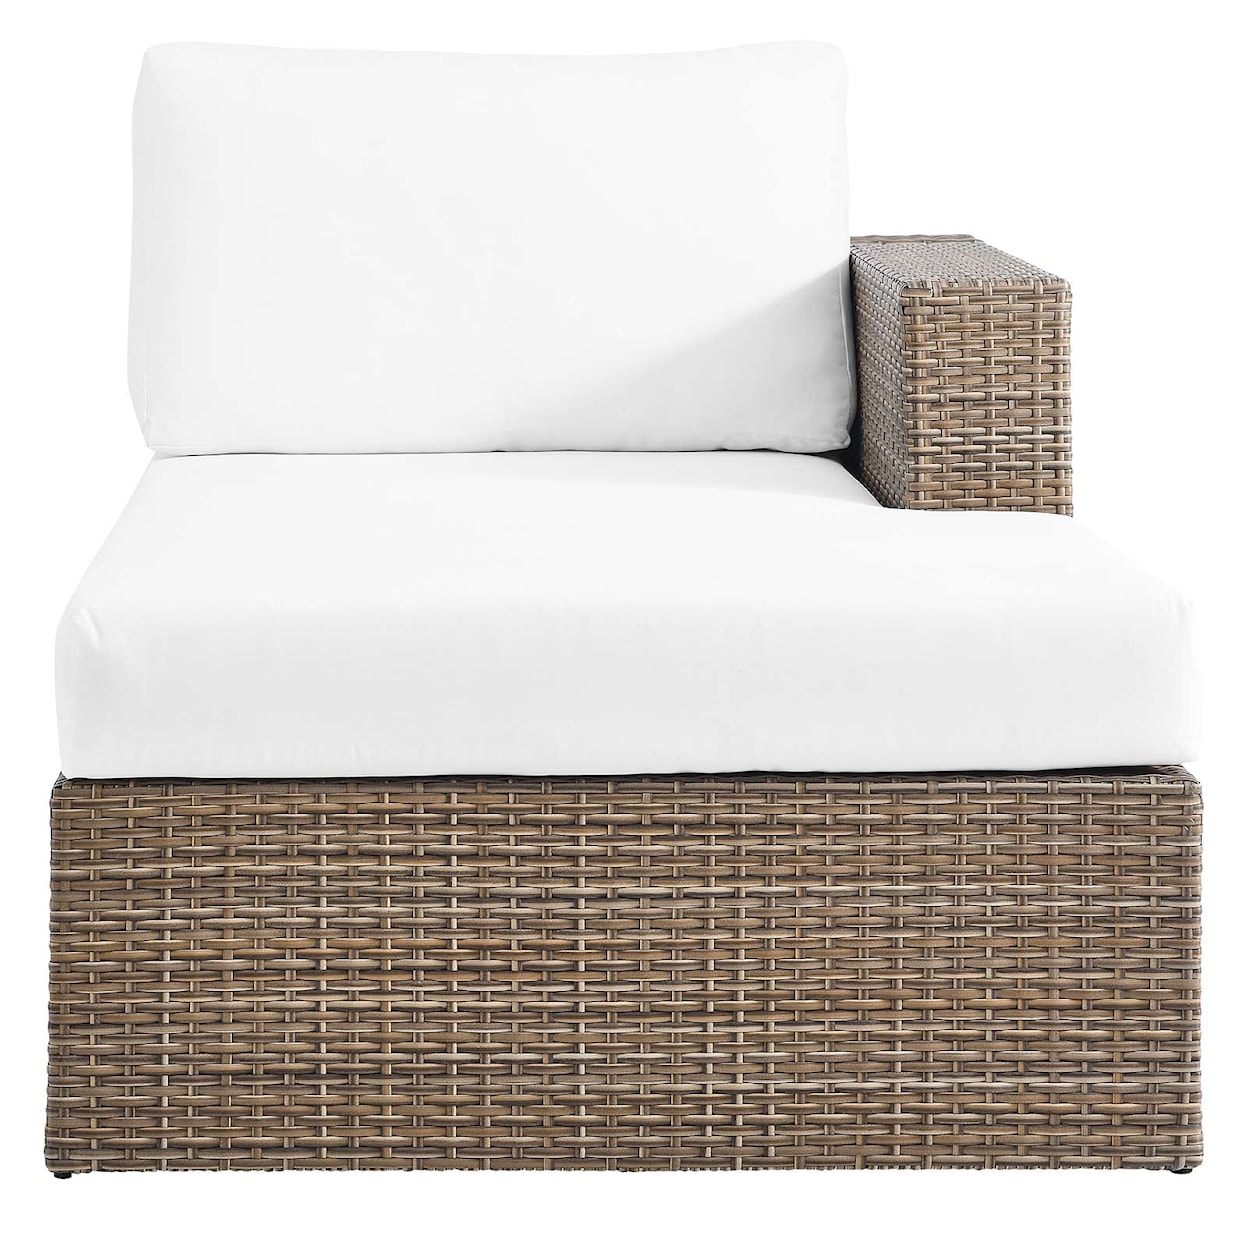 Modway Convene Outdoor Right-Arm Chaise